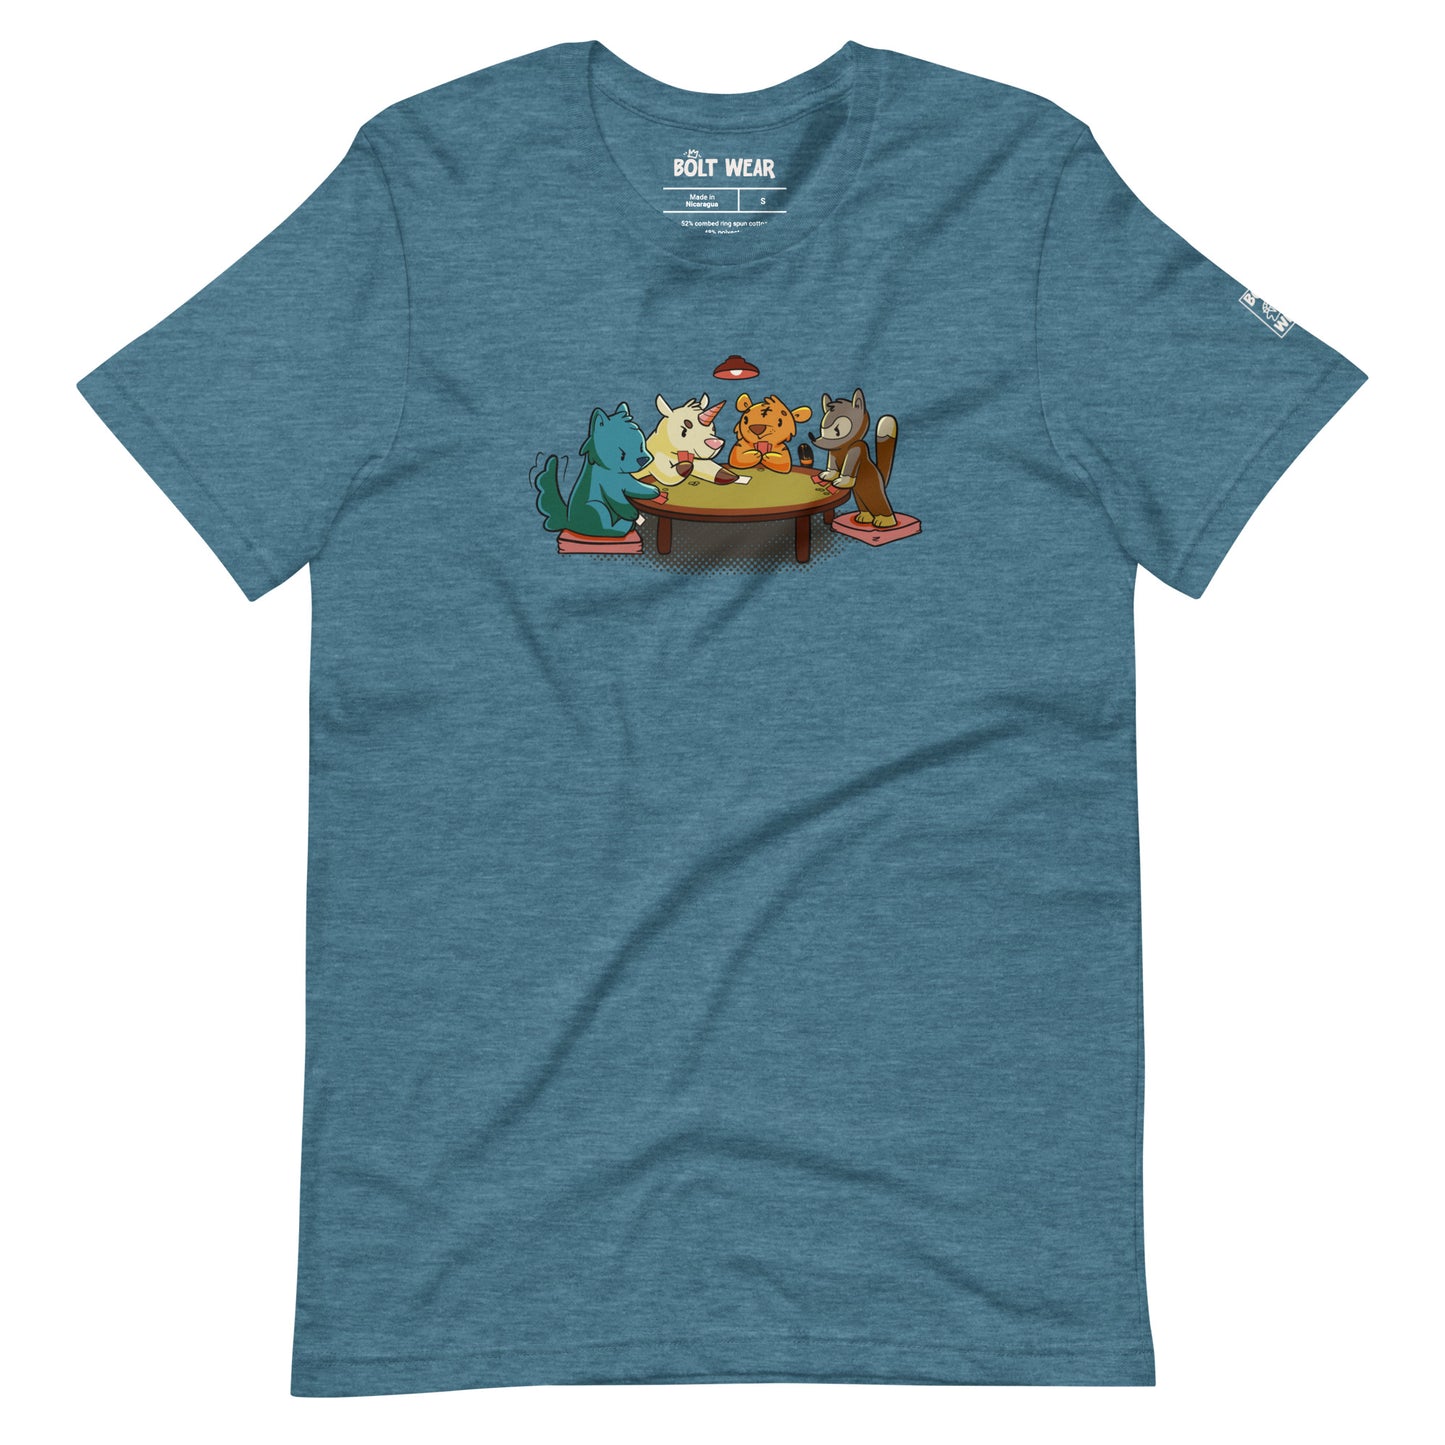 Heather Blue t-shirt featuring 4 animals, a wolf, a unicorn, a tiger, and a racoon, playing cards around a table